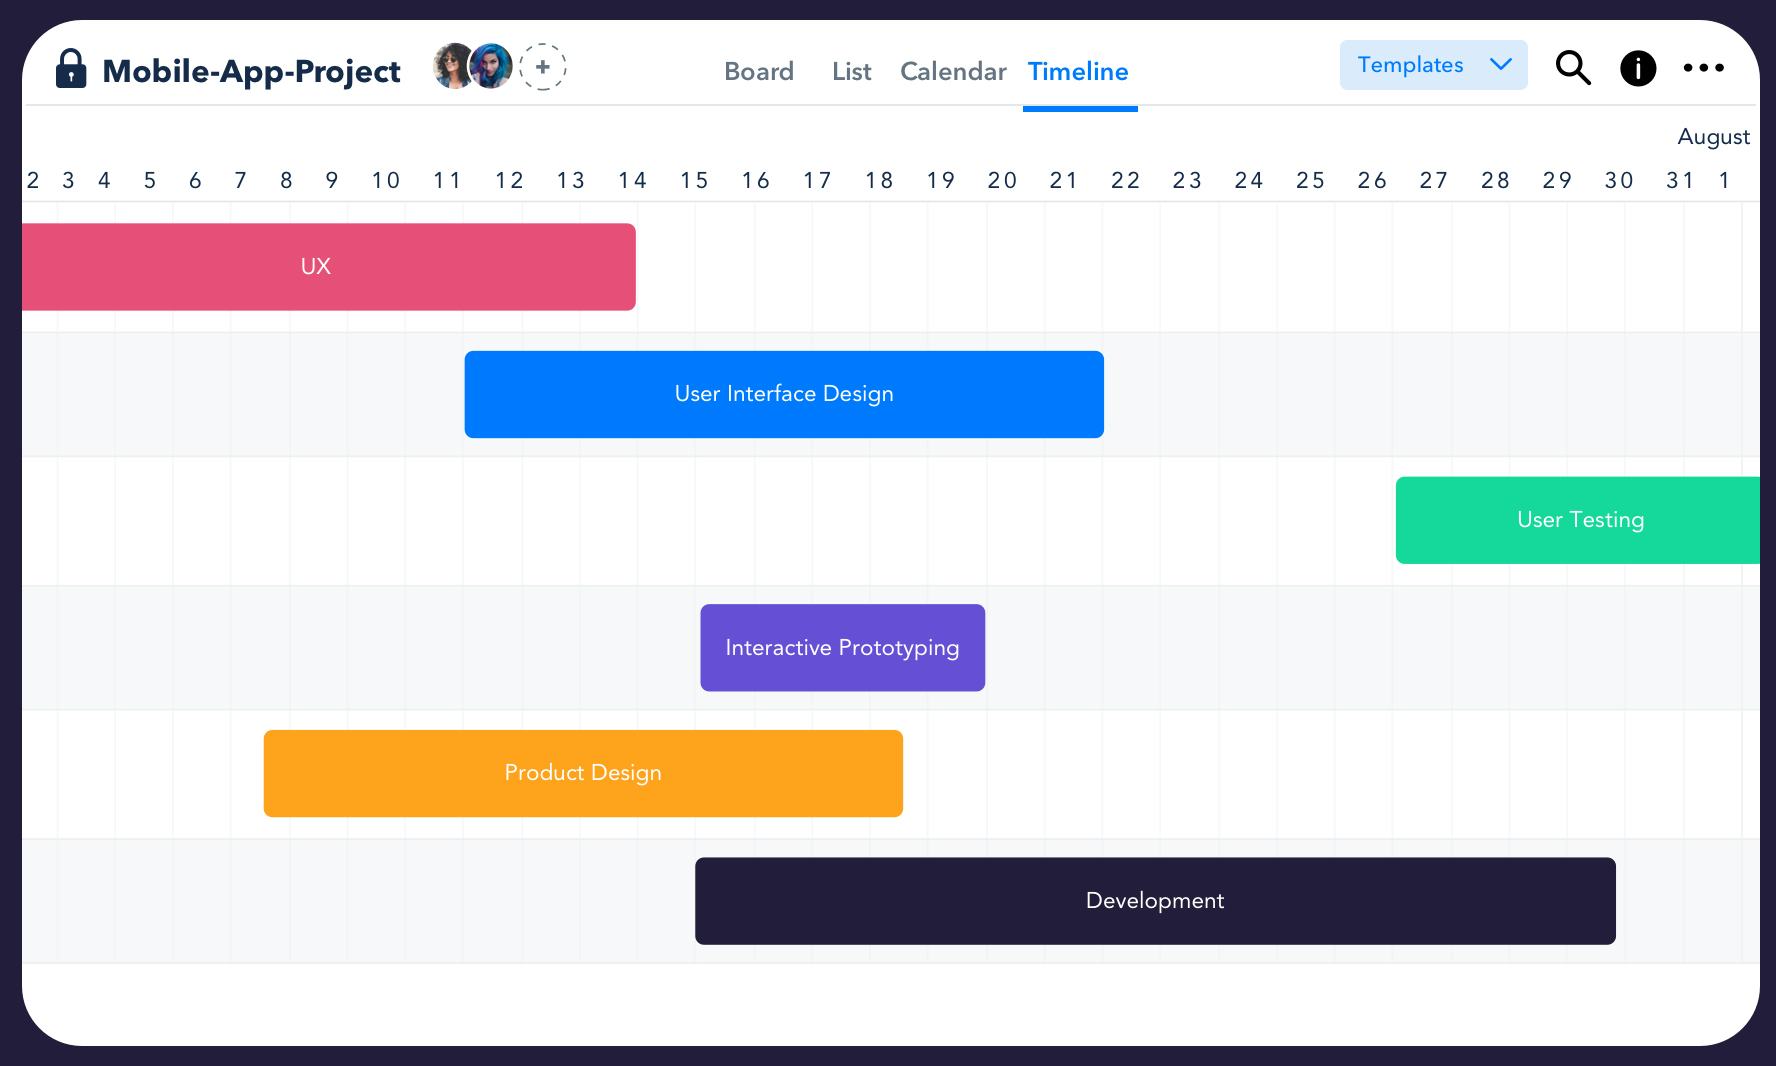 heycollab Software - Timeline views